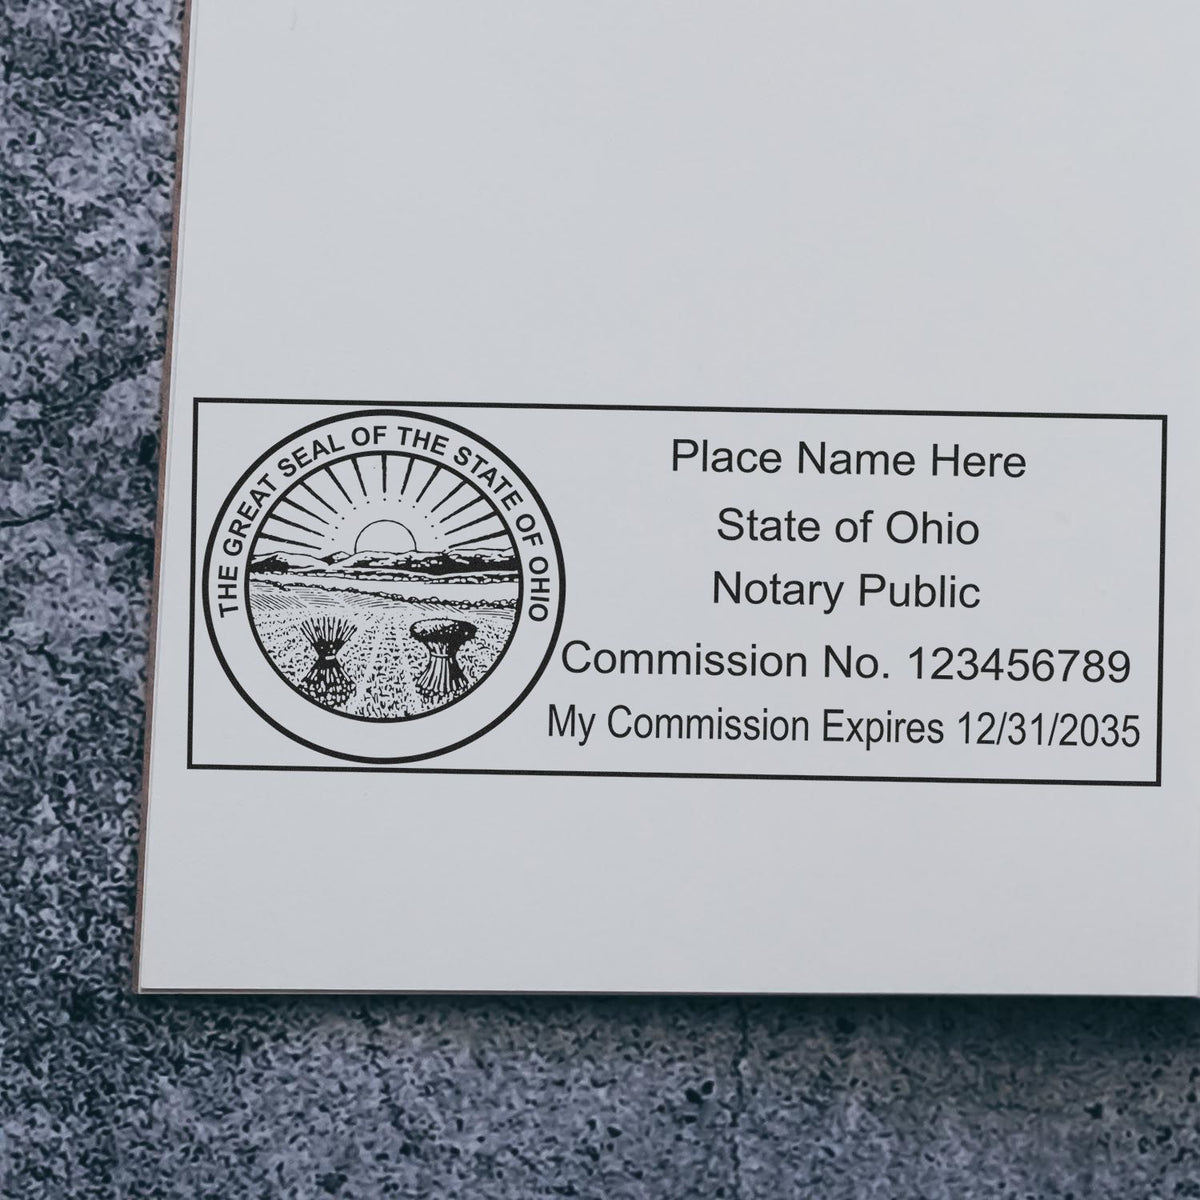 PSI Ohio Notary Stamp in use photo showing a stamped imprint of the PSI Ohio Notary Stamp